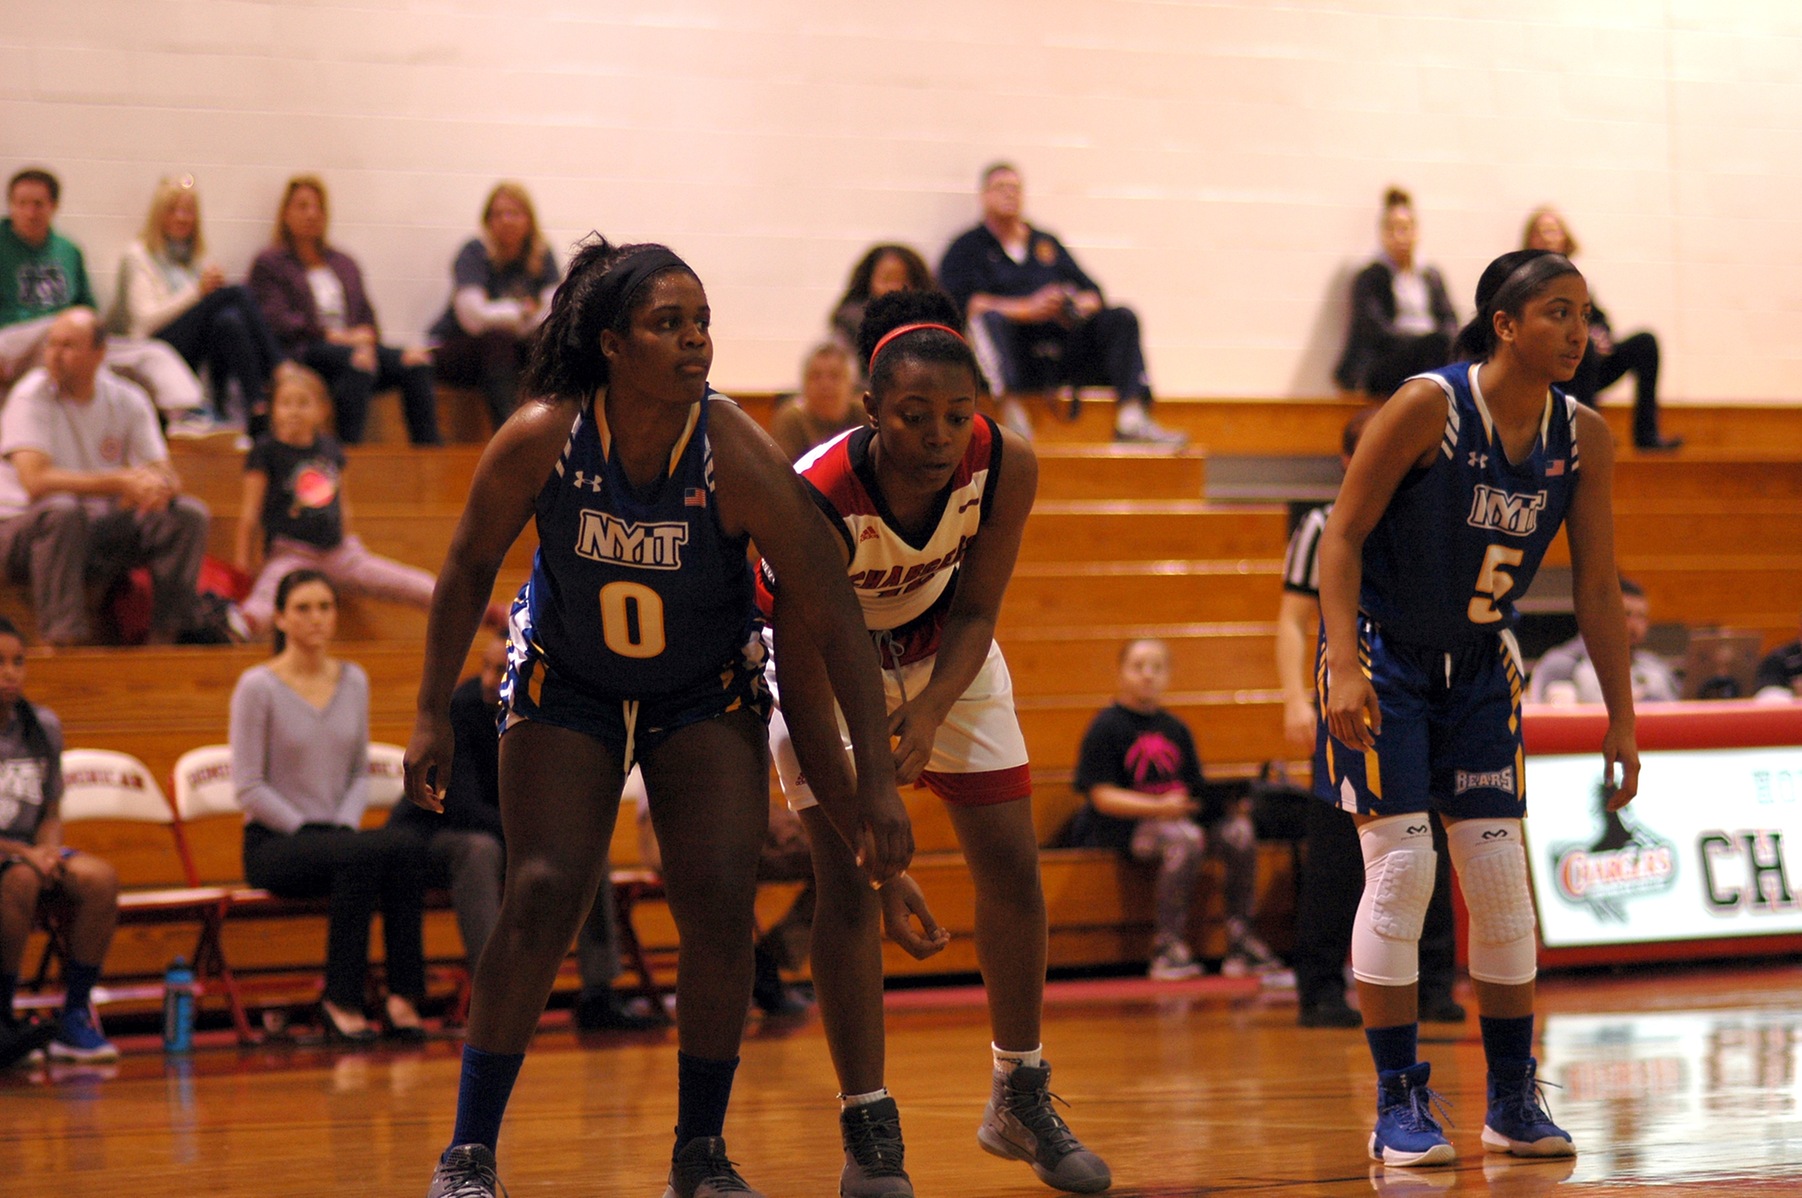 COUGARS GET REVENGE AGAINST LADY CHARGERS